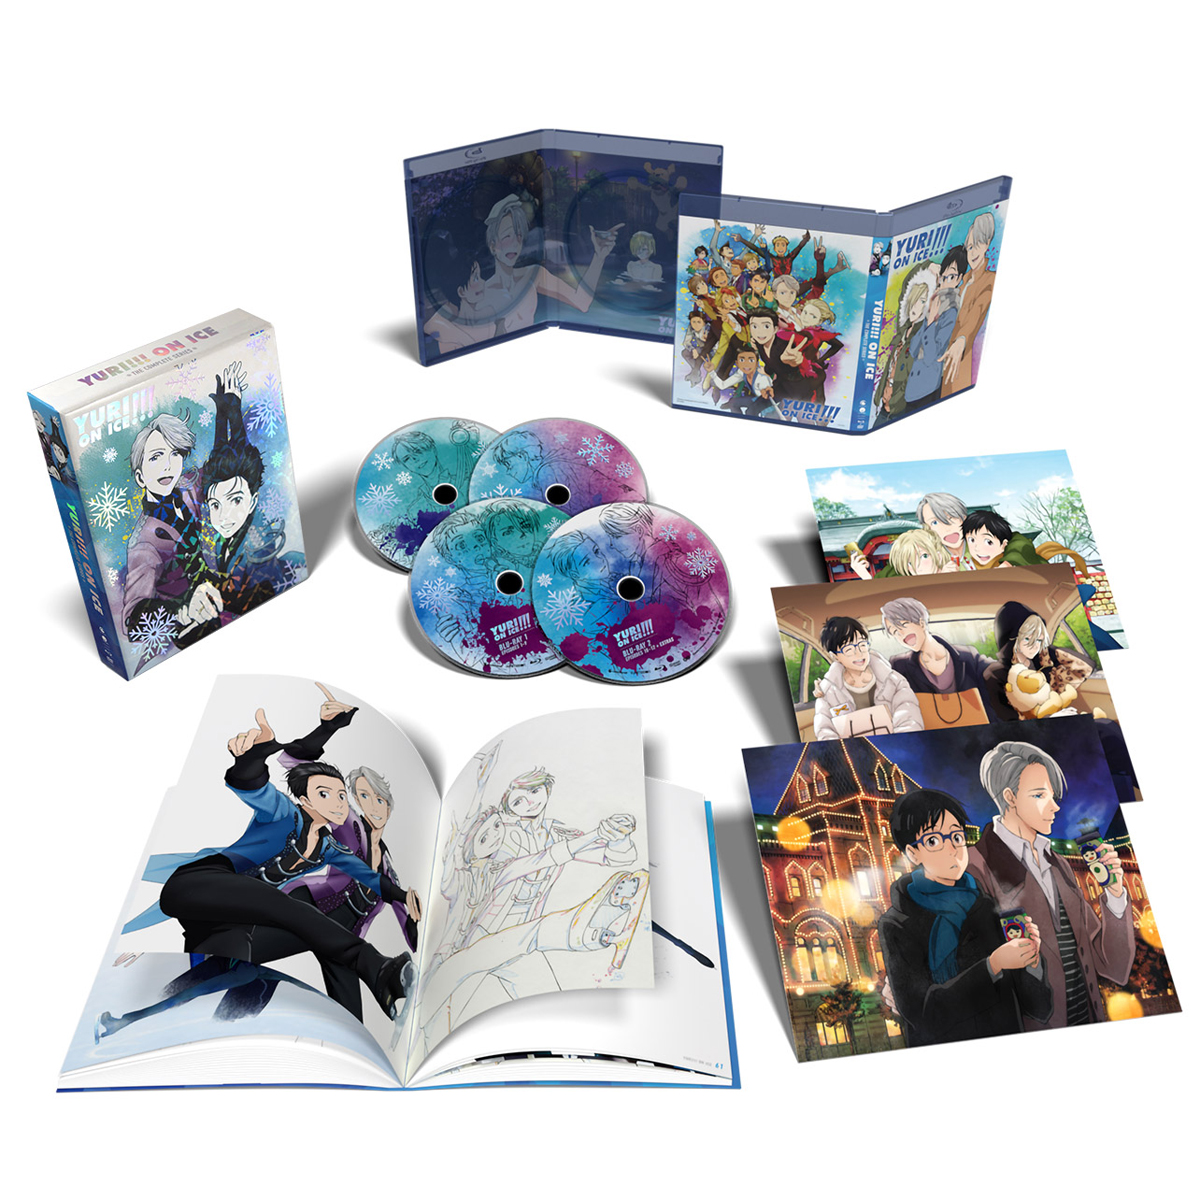 Yuri!!! on ICE Limited Edition Blu-ray/DVD image count 1